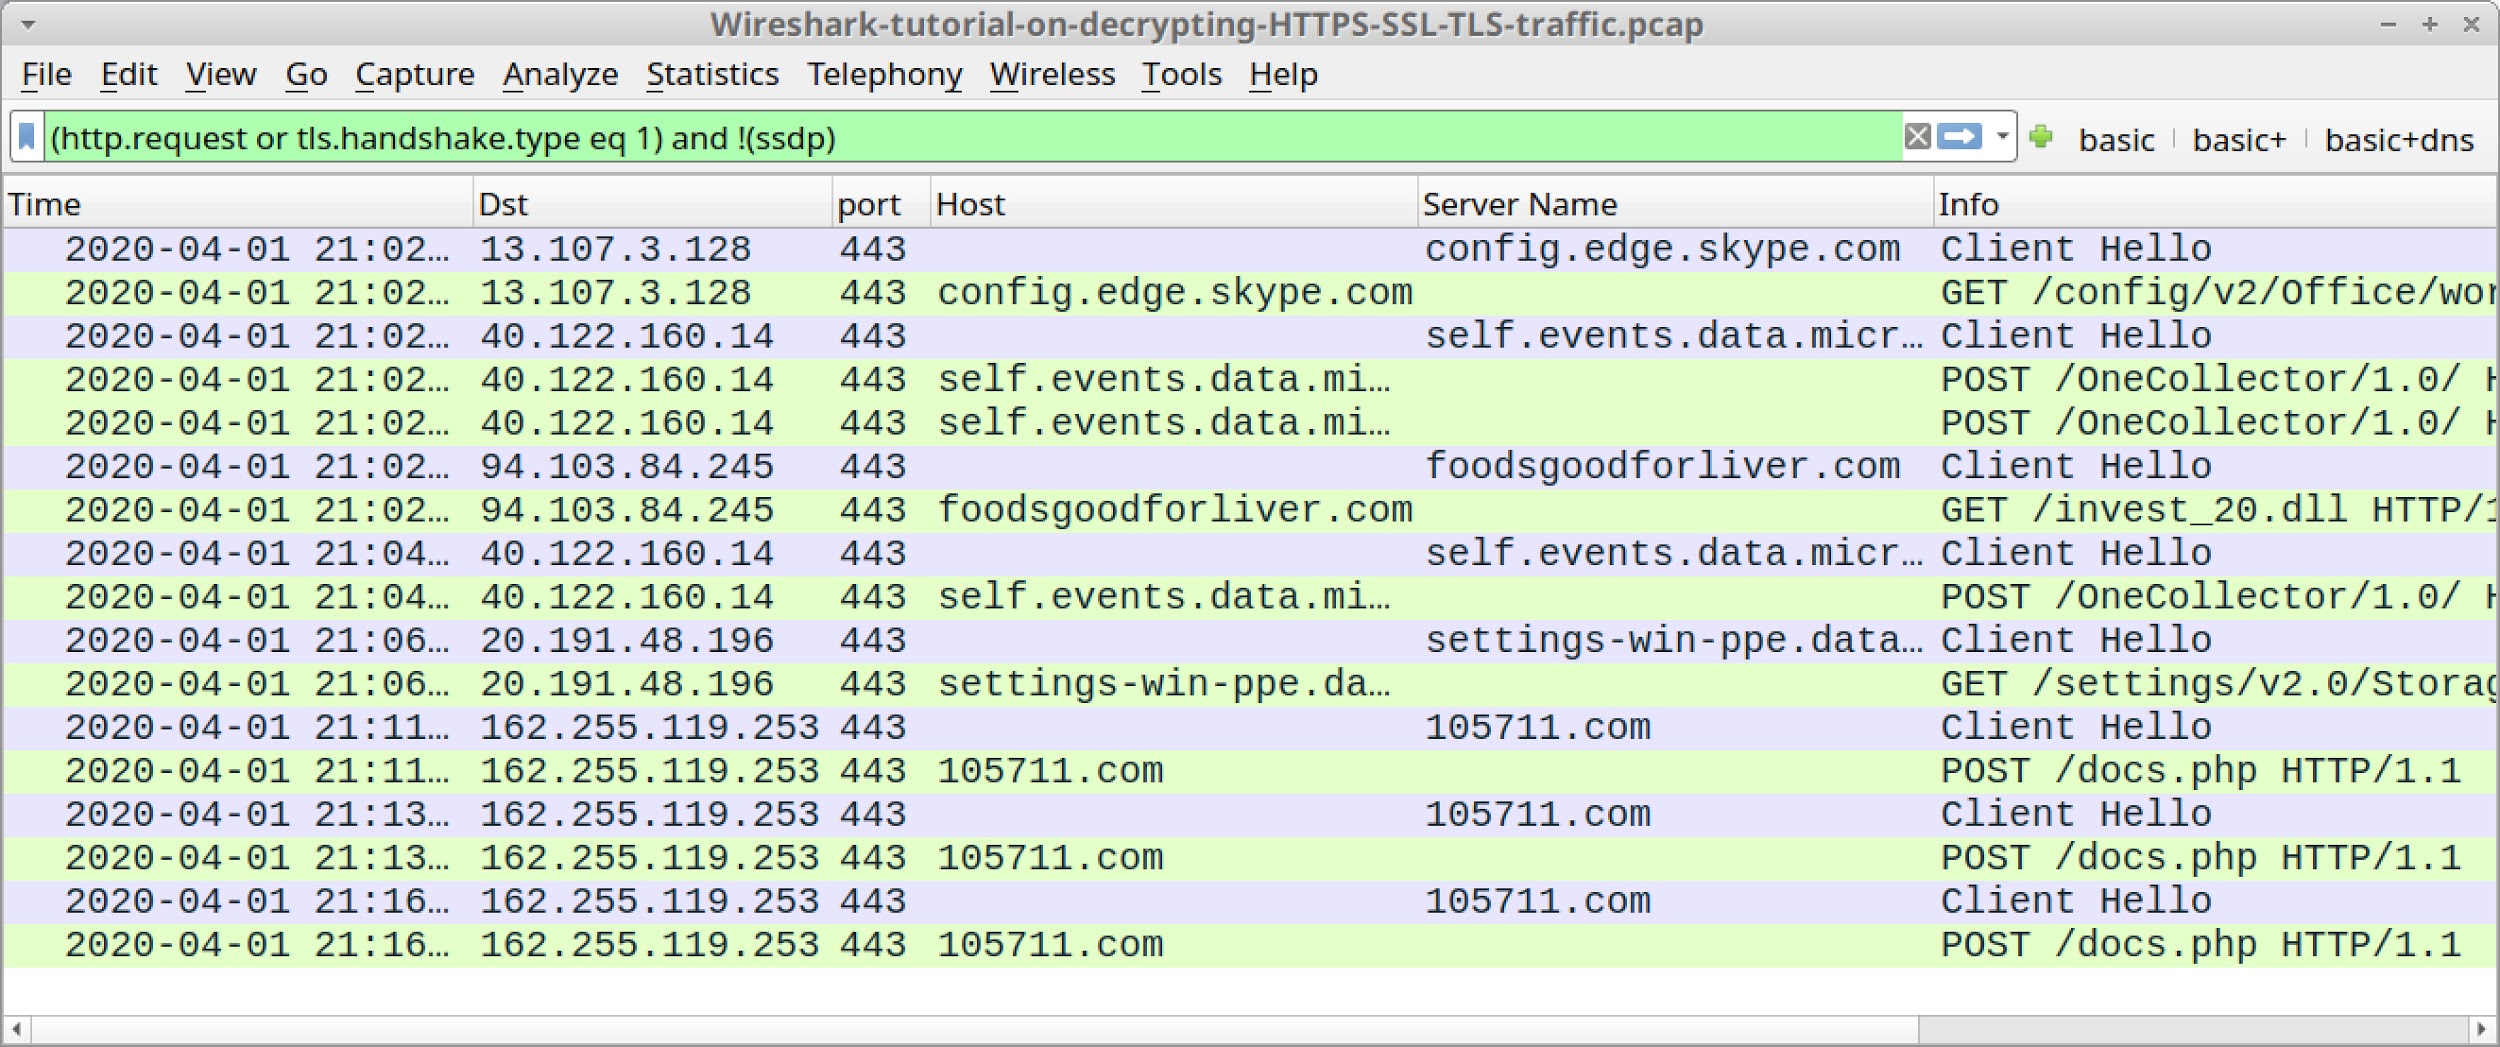 This screenshot advances the decrypting HTTPS traffic tutorial by showing how your Wireshark column display will list decrypted HTTP requests under each of the HTTPS lines. 